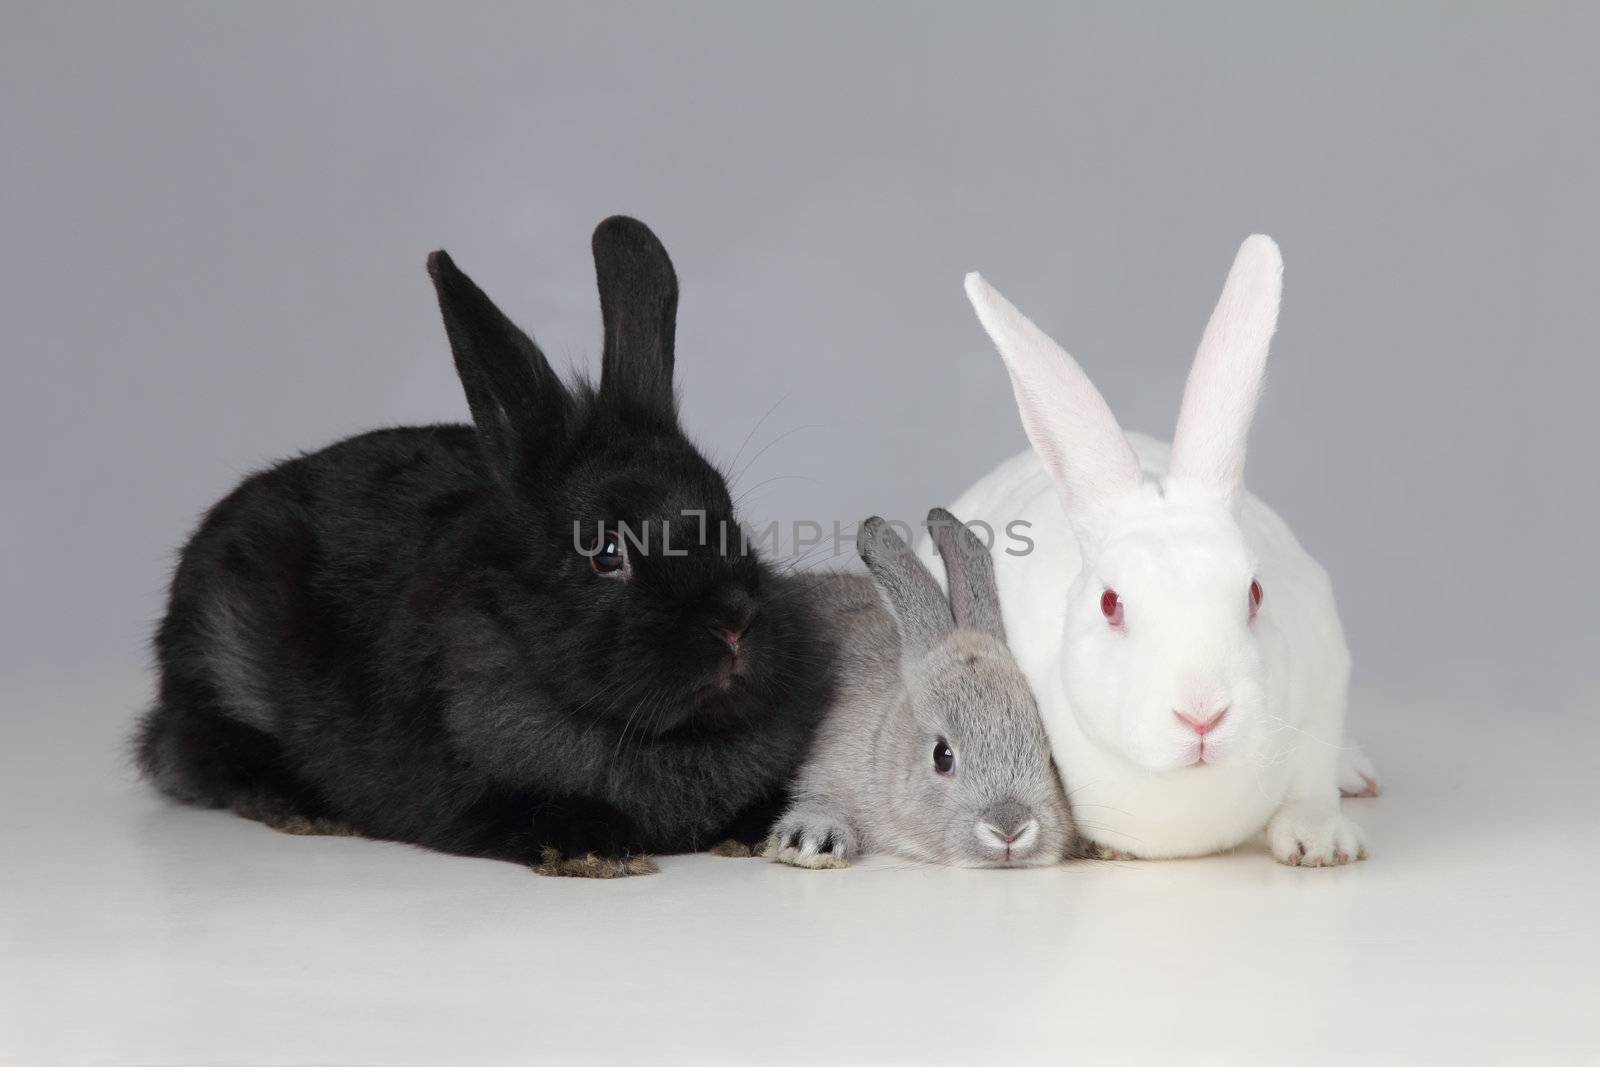 White Black and Gray Bunnies by libyphoto